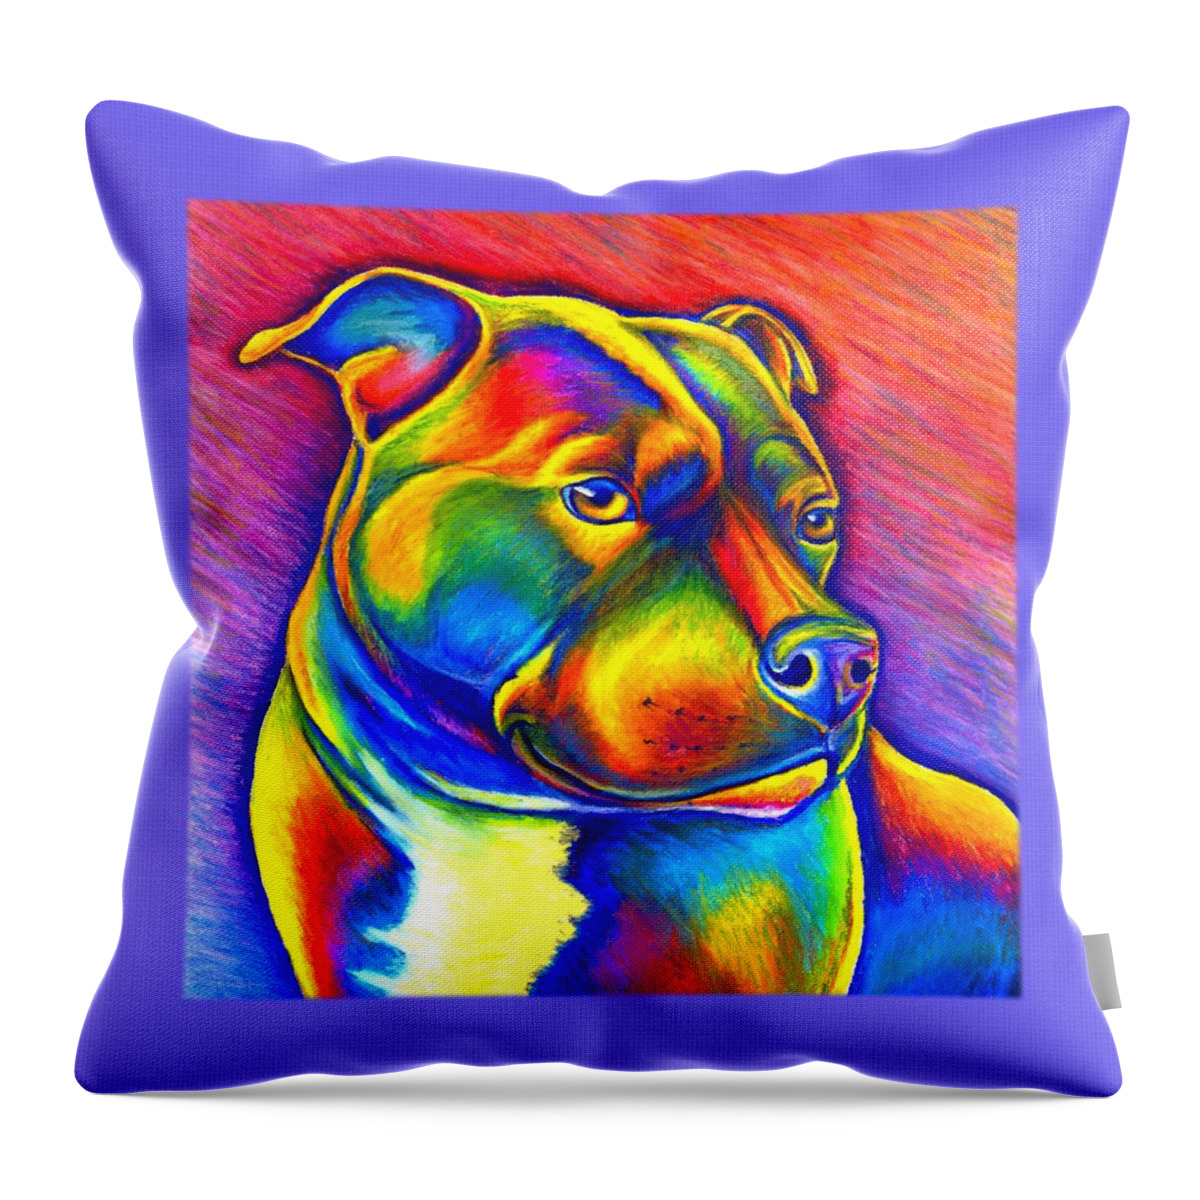 Staffordshire Bull Terrier Throw Pillow featuring the painting Colorful Rainbow Staffordshire Bull Terrier Dog by Rebecca Wang